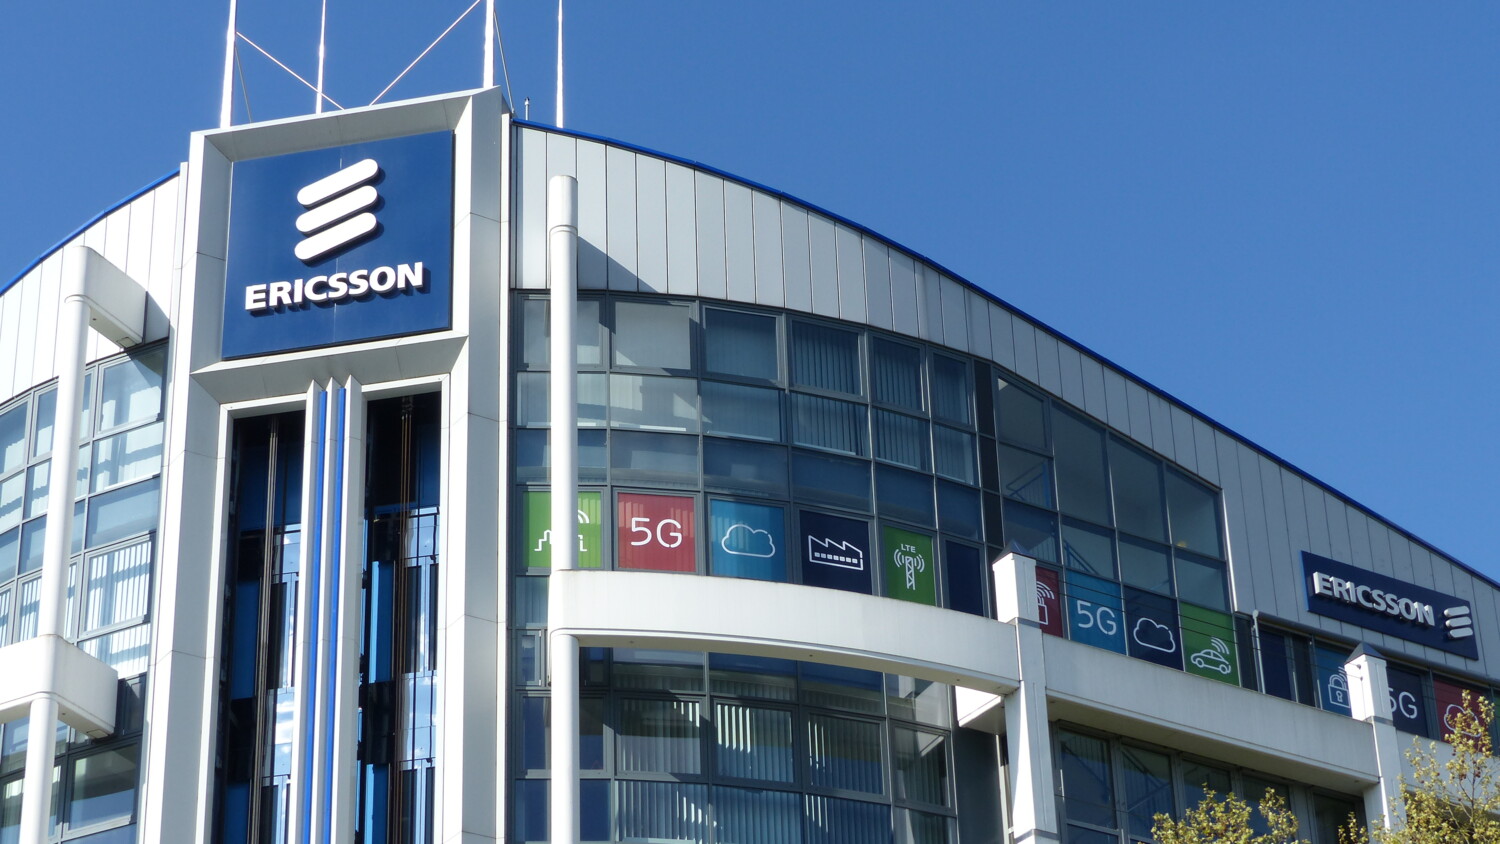 According to an Ericsson report, tiered pricing for 5G will be reinstated